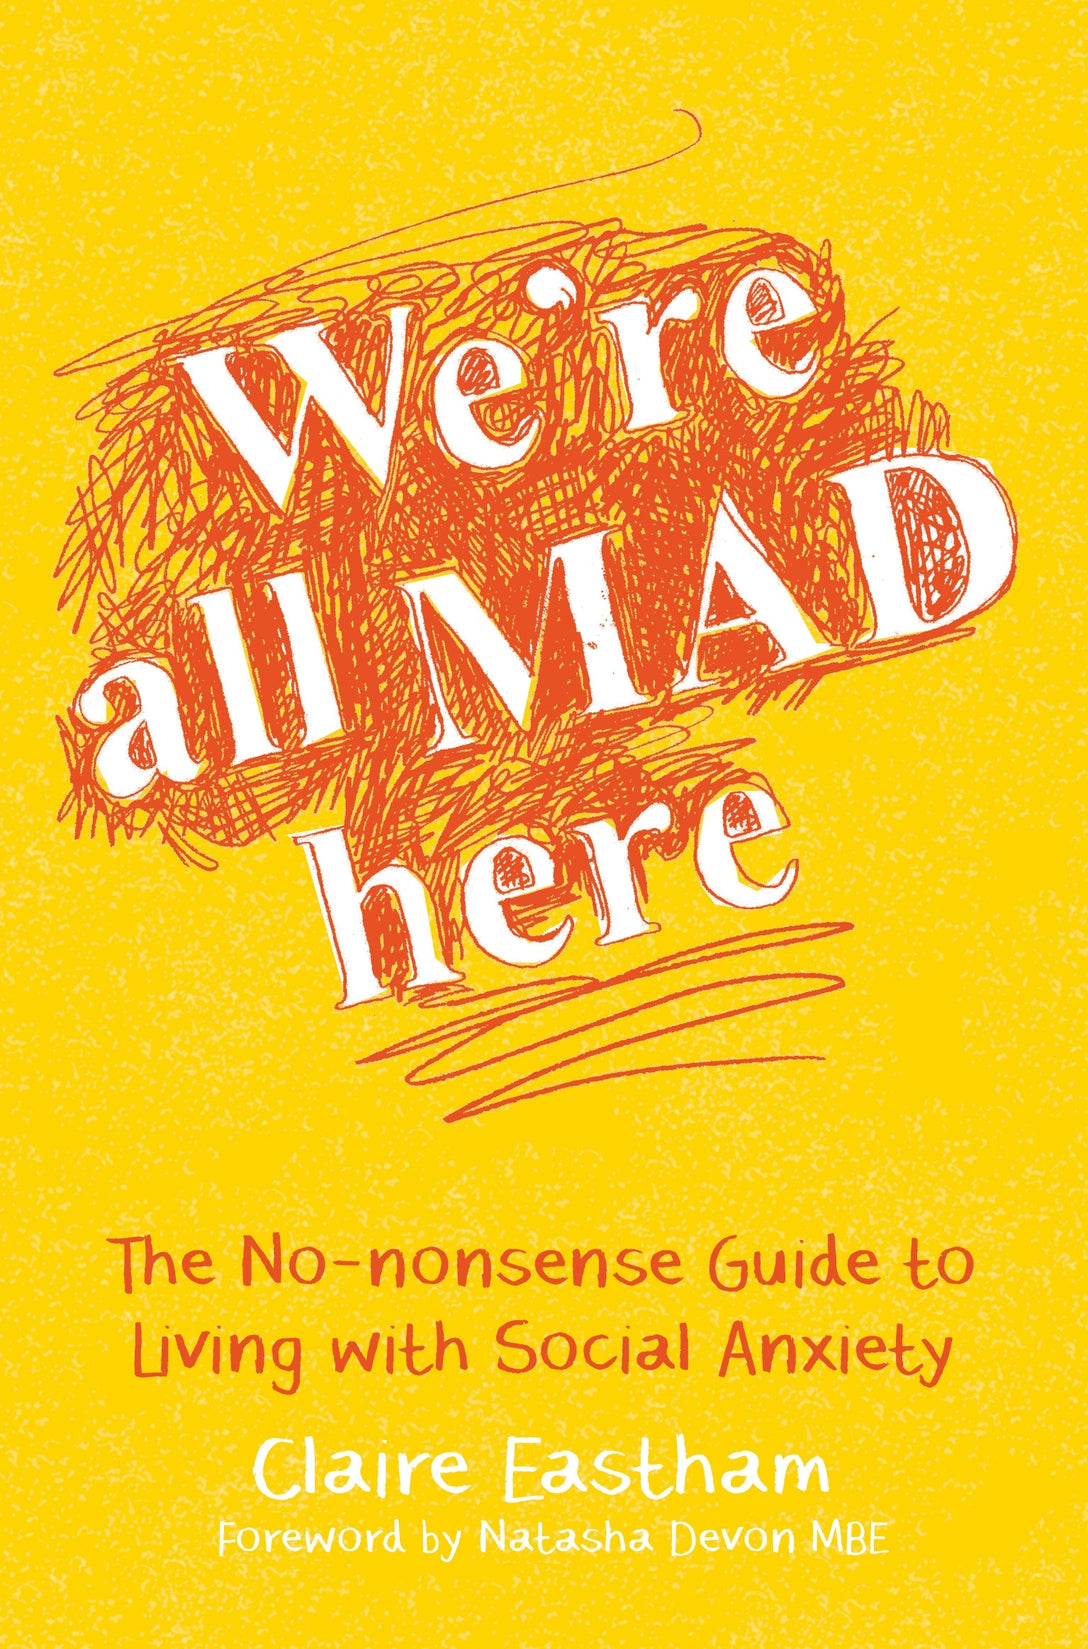 We're All Mad Here by Natasha Devon, Claire Eastham